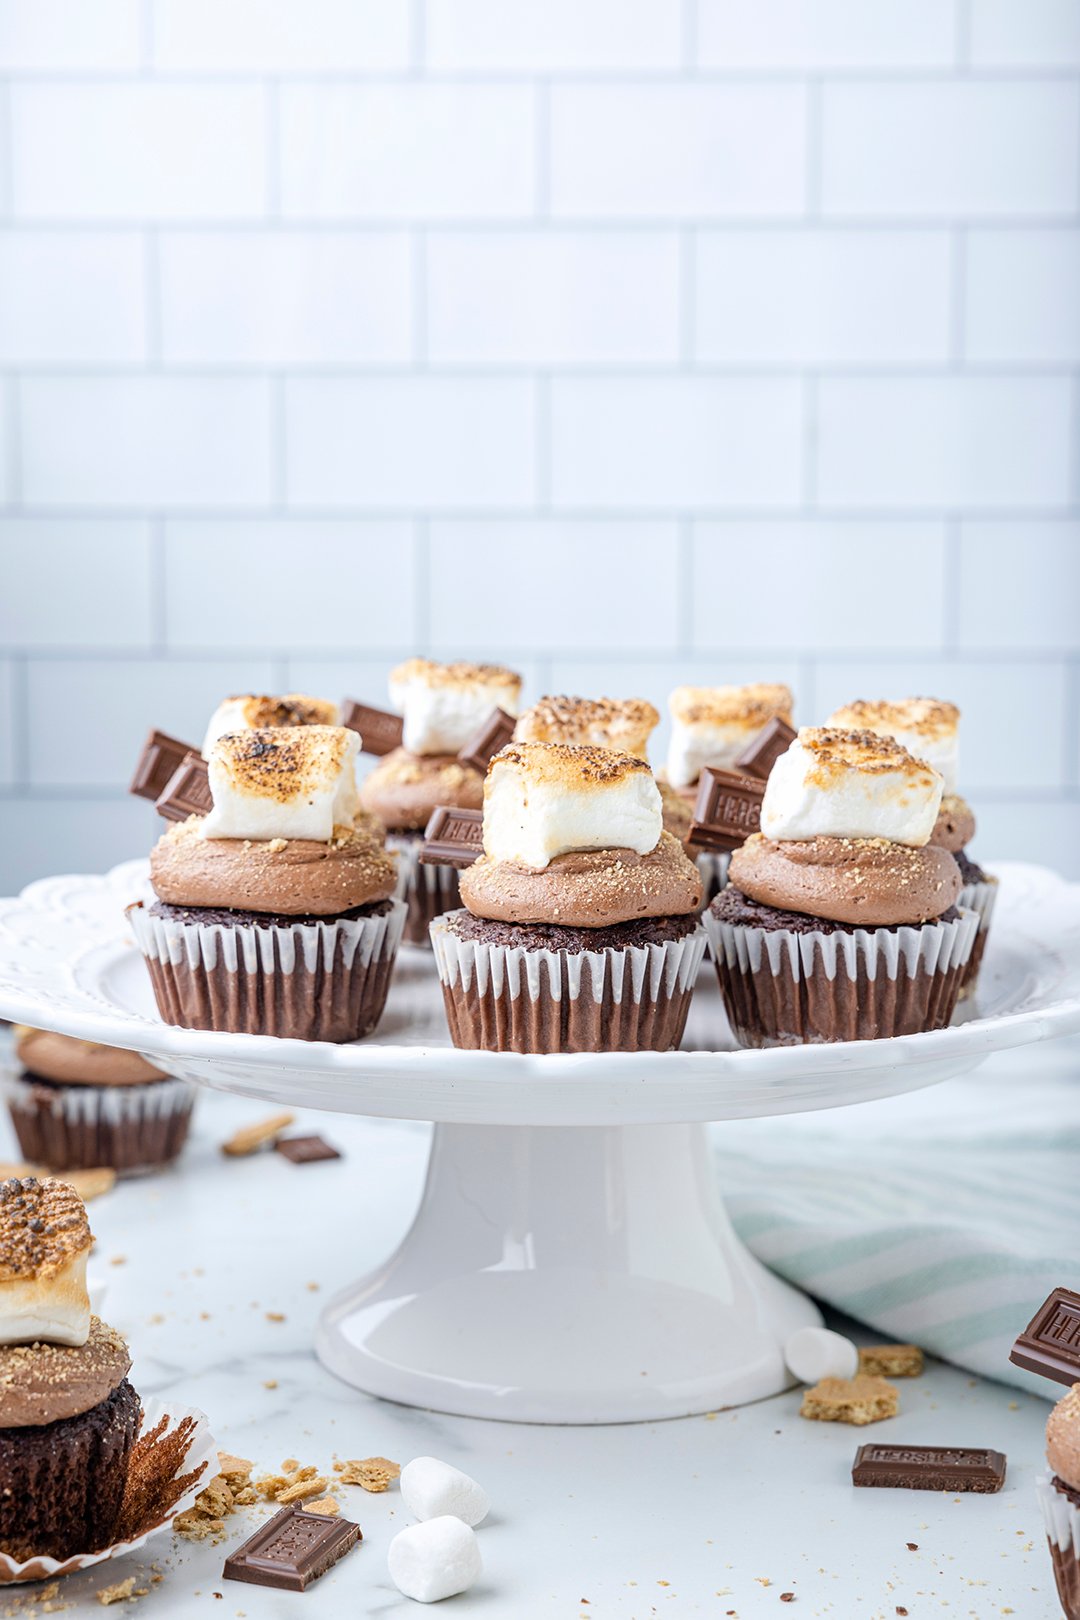 smores cupcakes being served on a white ceramic cake stand. delicious s'mores cupcakes topped with square toasted marshmallows